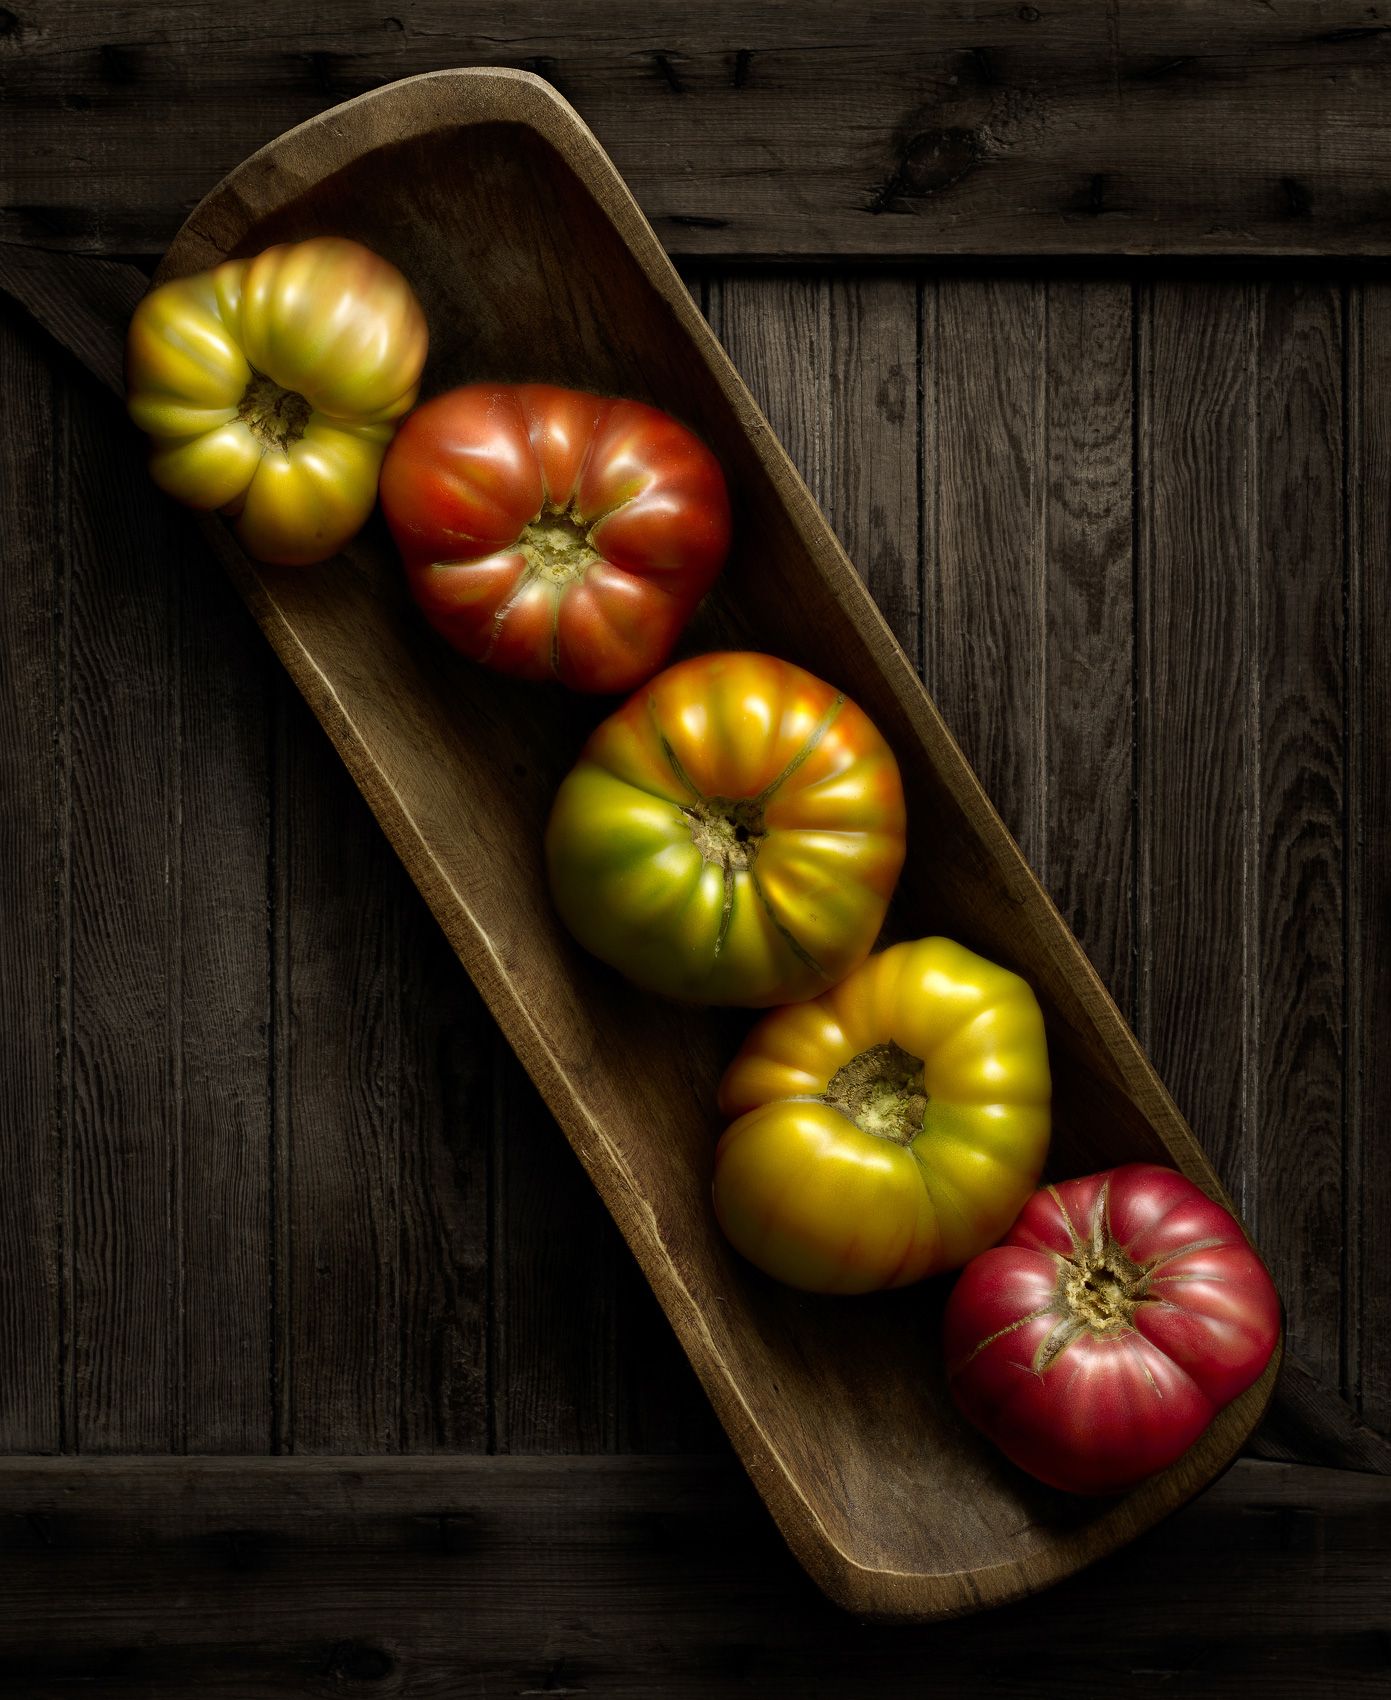 Heirloom Tomatoes by Harold Ross